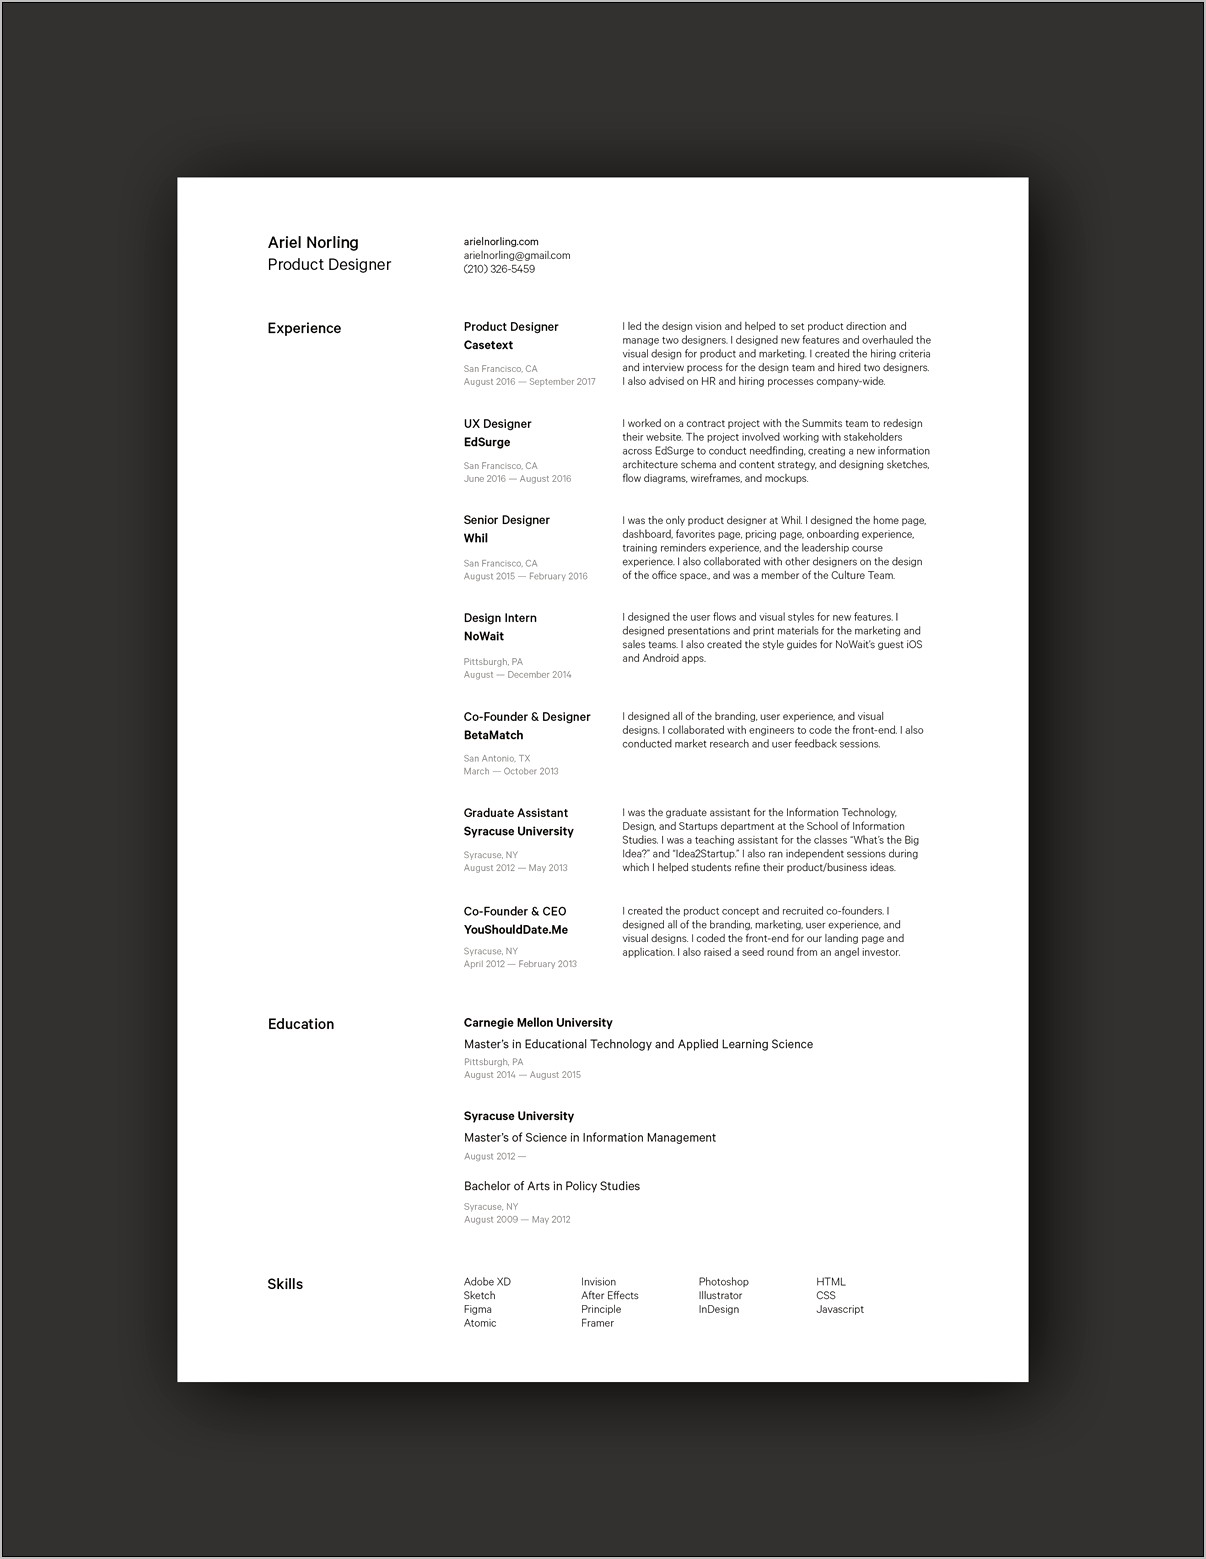 Resume Objective For Printing Company